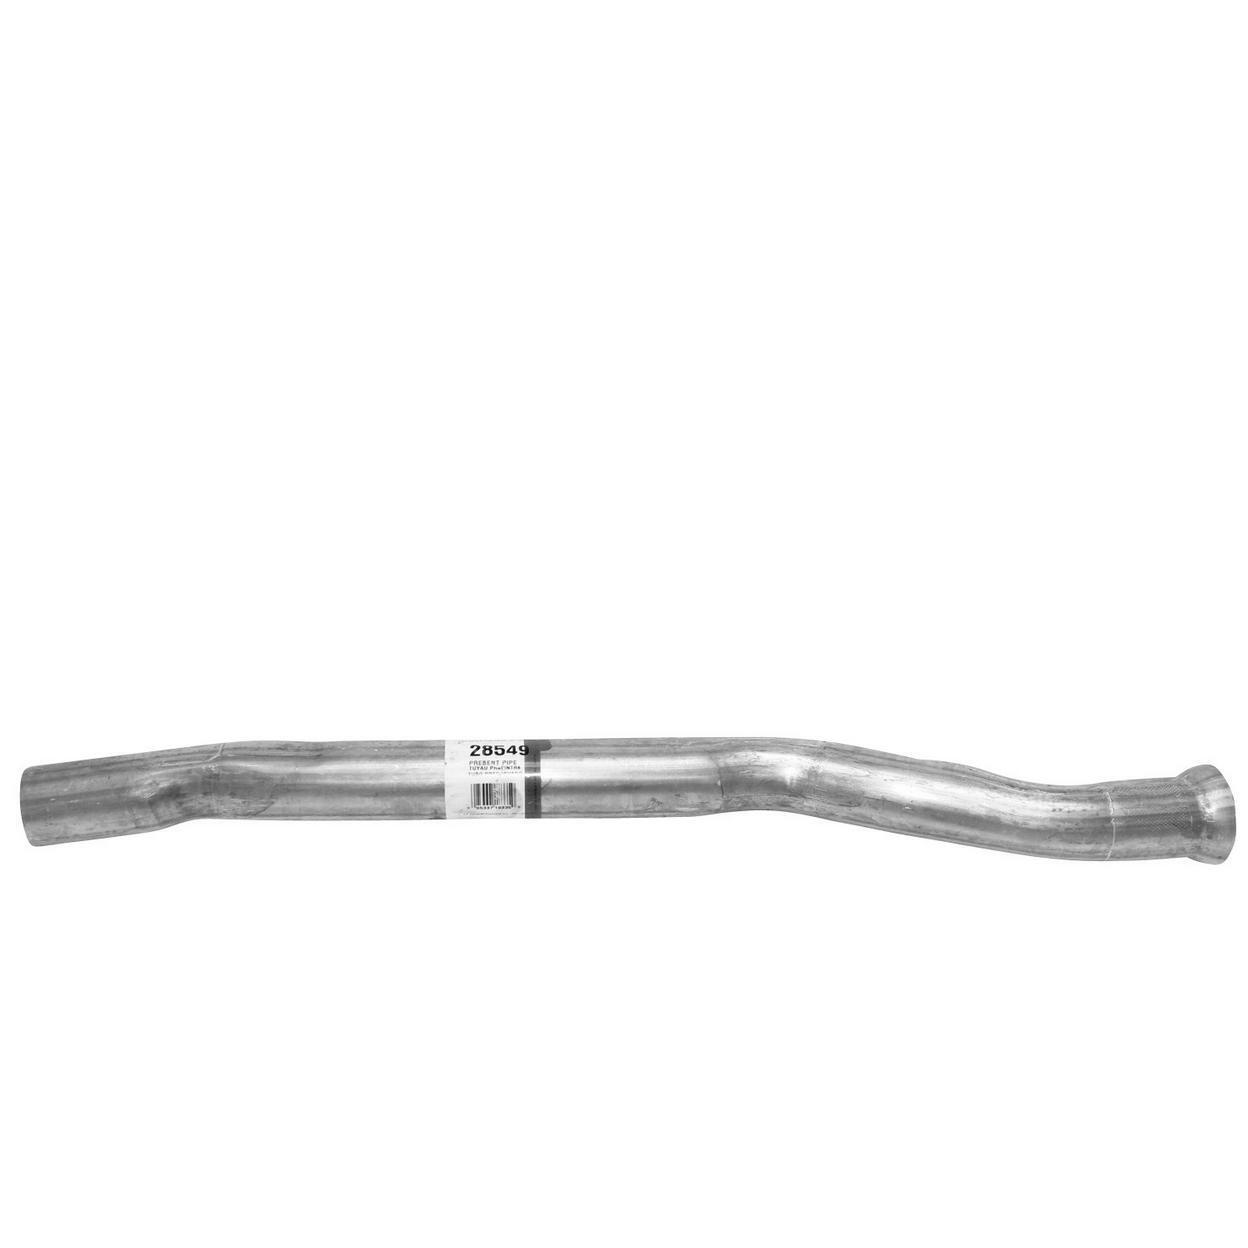 28549-AN Exhaust Pipe Fits 1994-1996 Volvo 850 GLT 2.4L L5 GAS DOHC